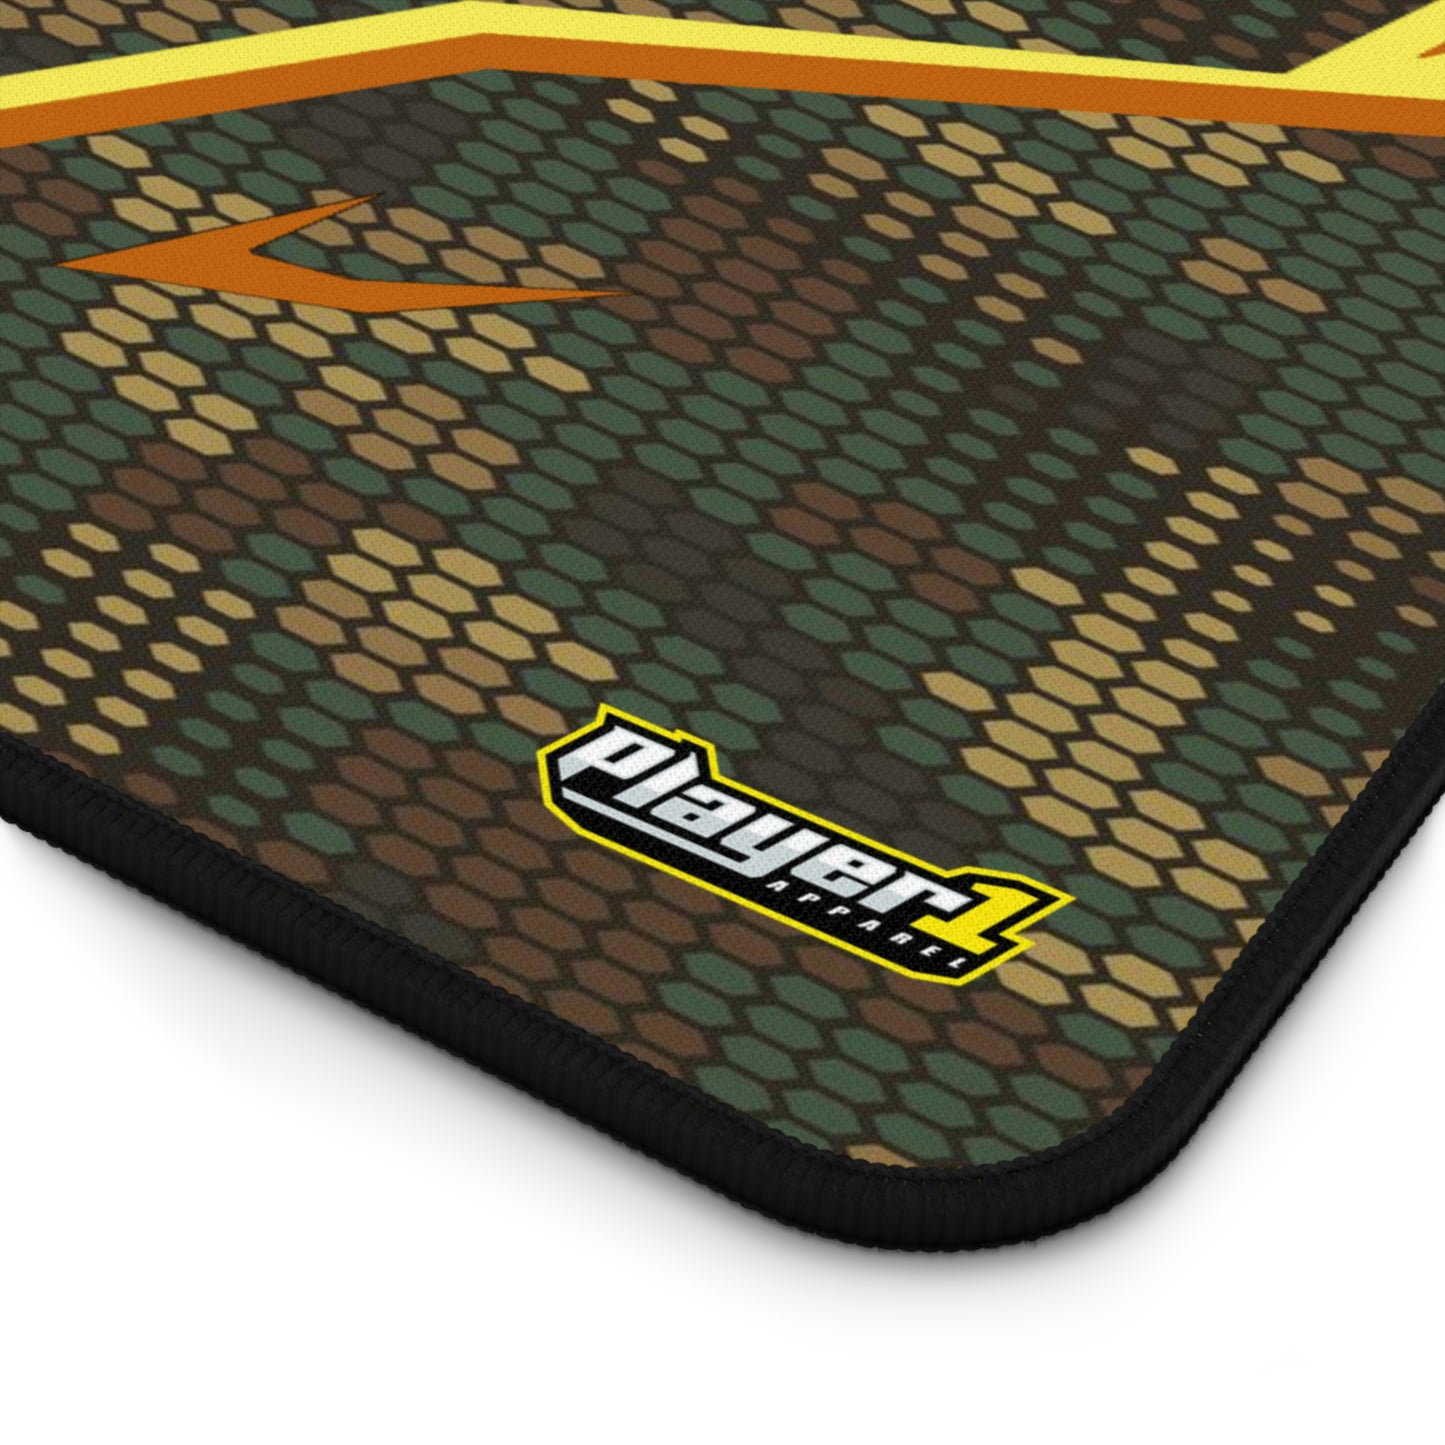 Smarmy Tank Mouse Pad